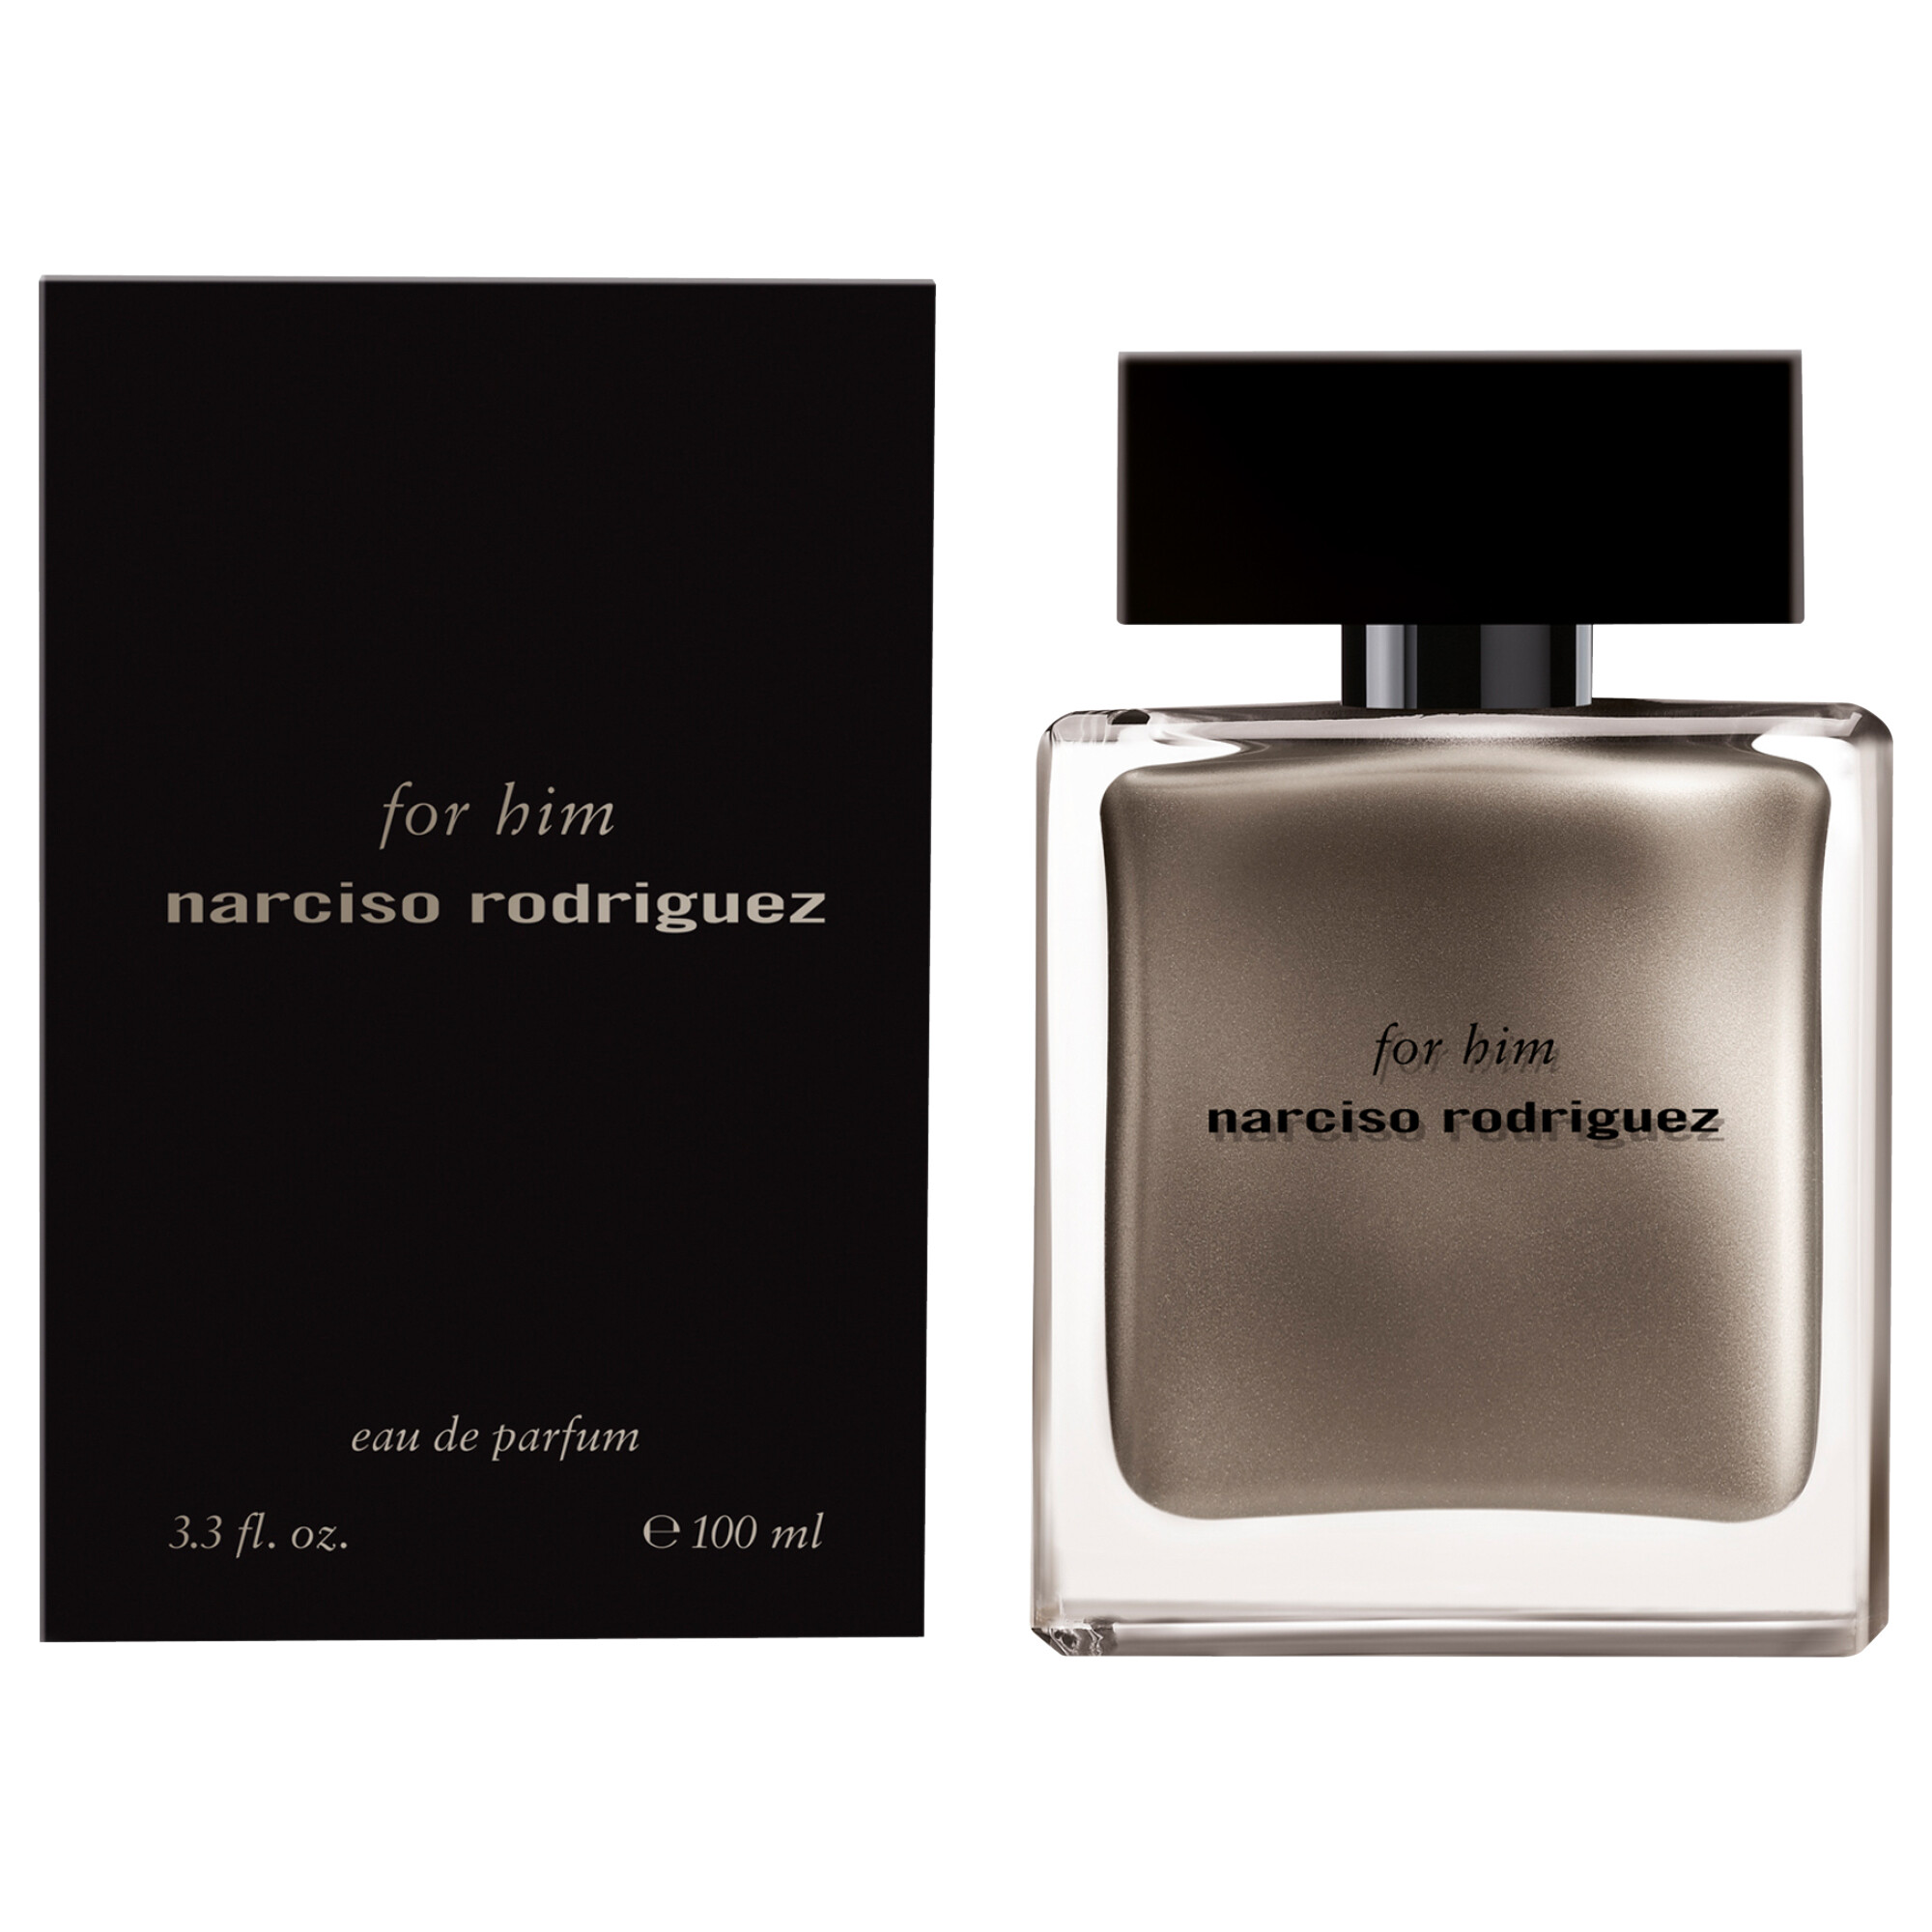 Narciso Rodriguez Narciso Rodriguez for him EDP 100ml bestellen